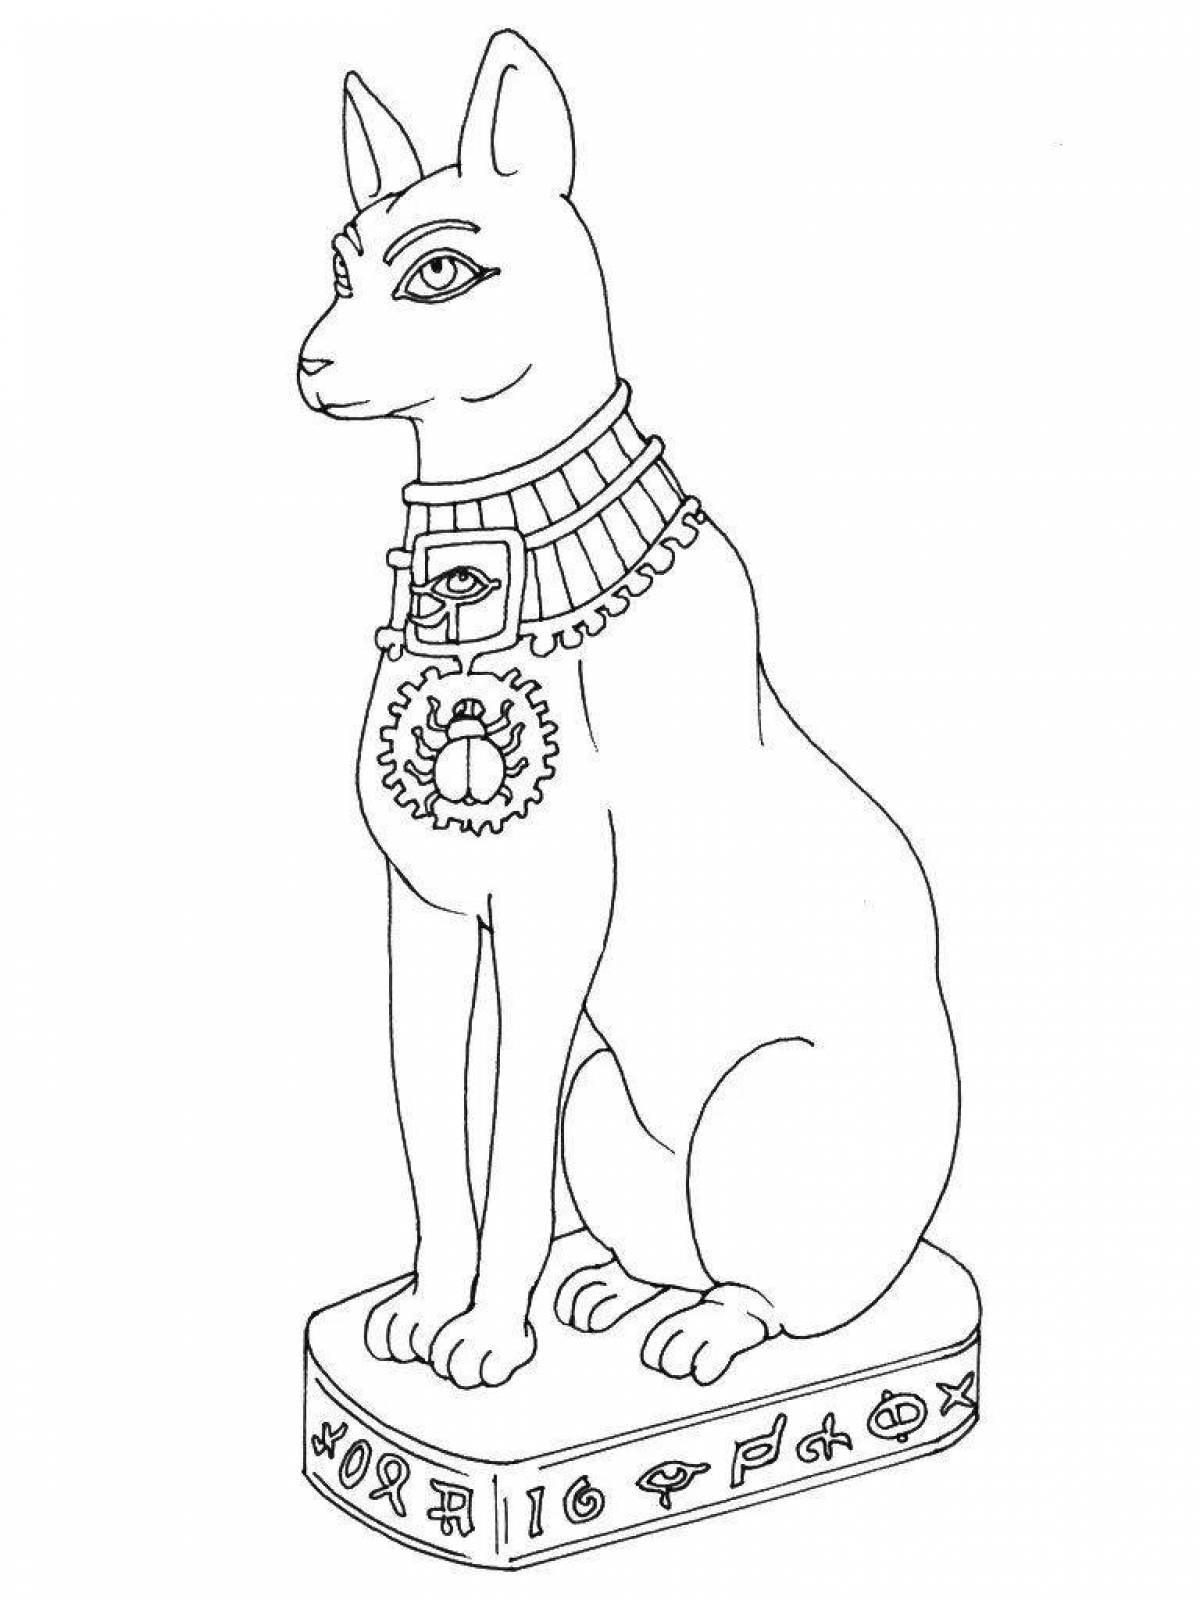 Coloring page bright egyptian cat